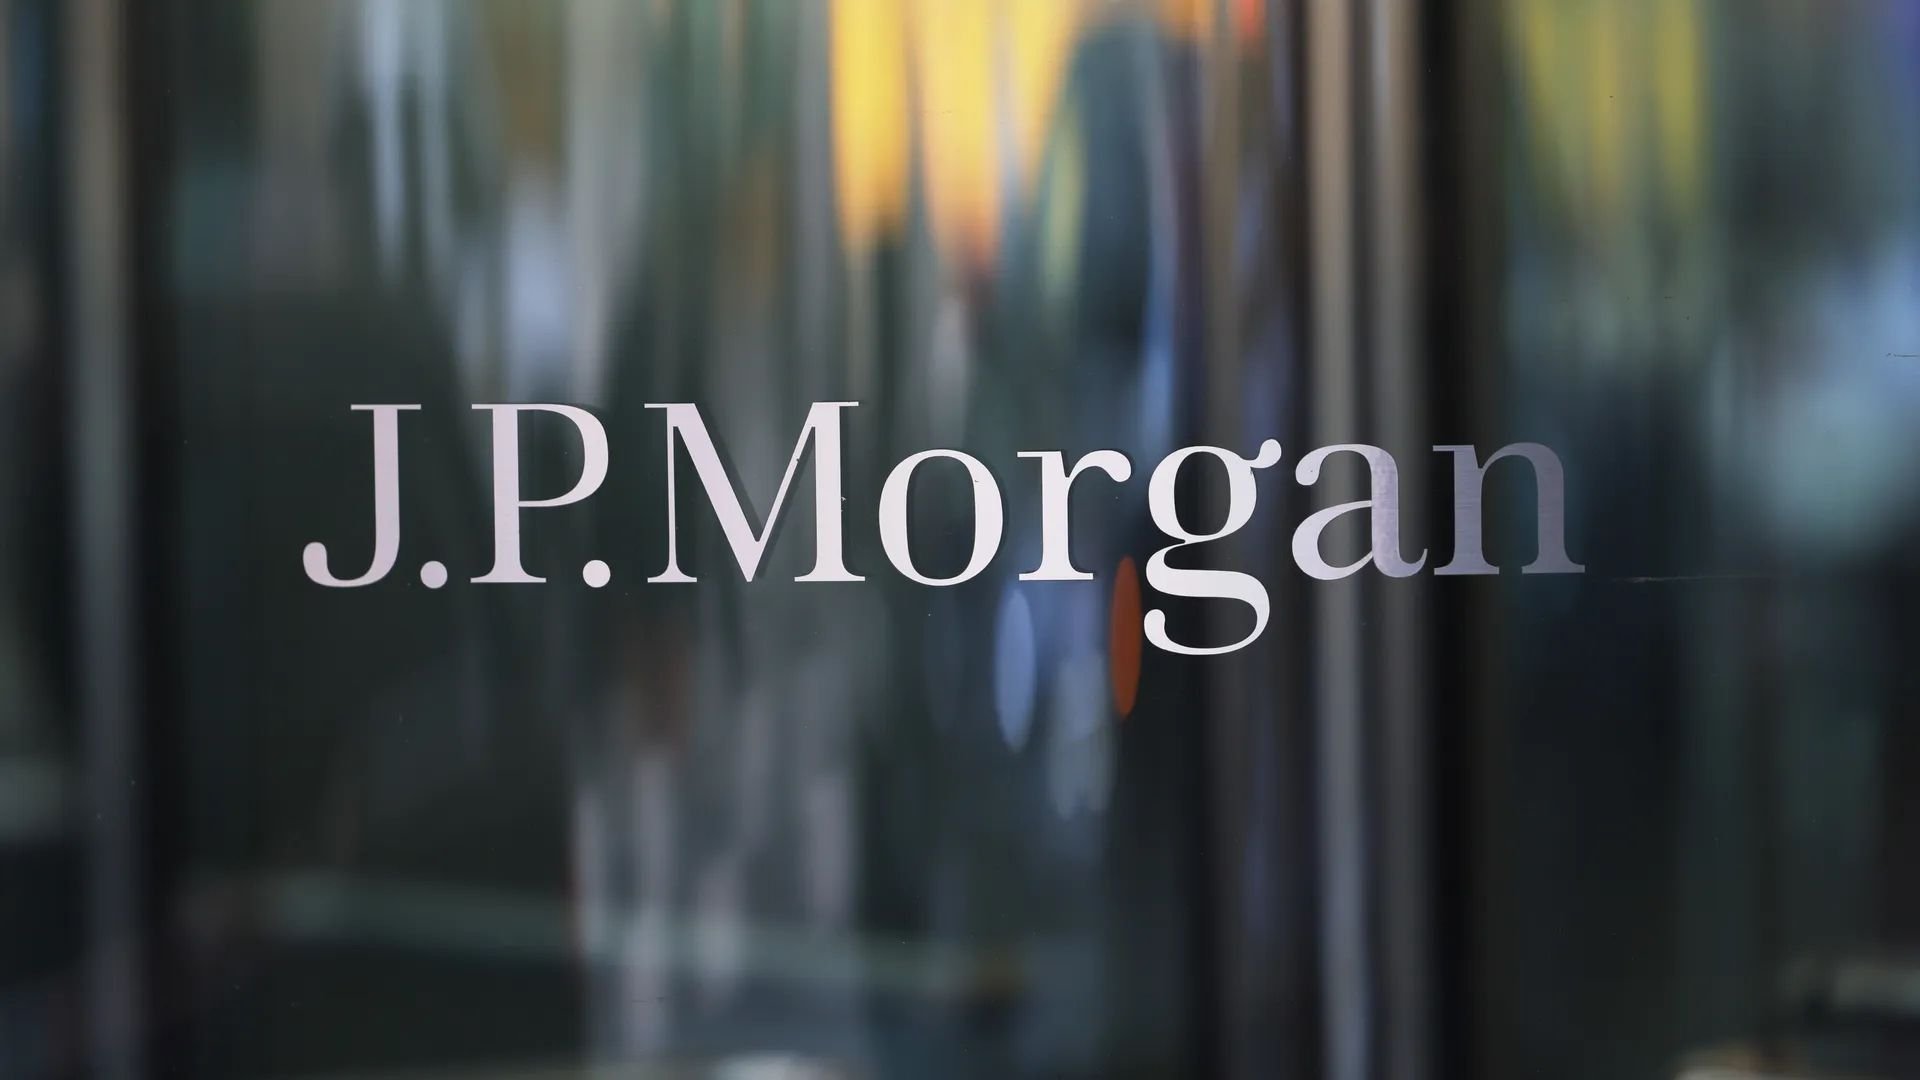 JPMorgan agrees to pay $75 million in settlement over Epstein ties